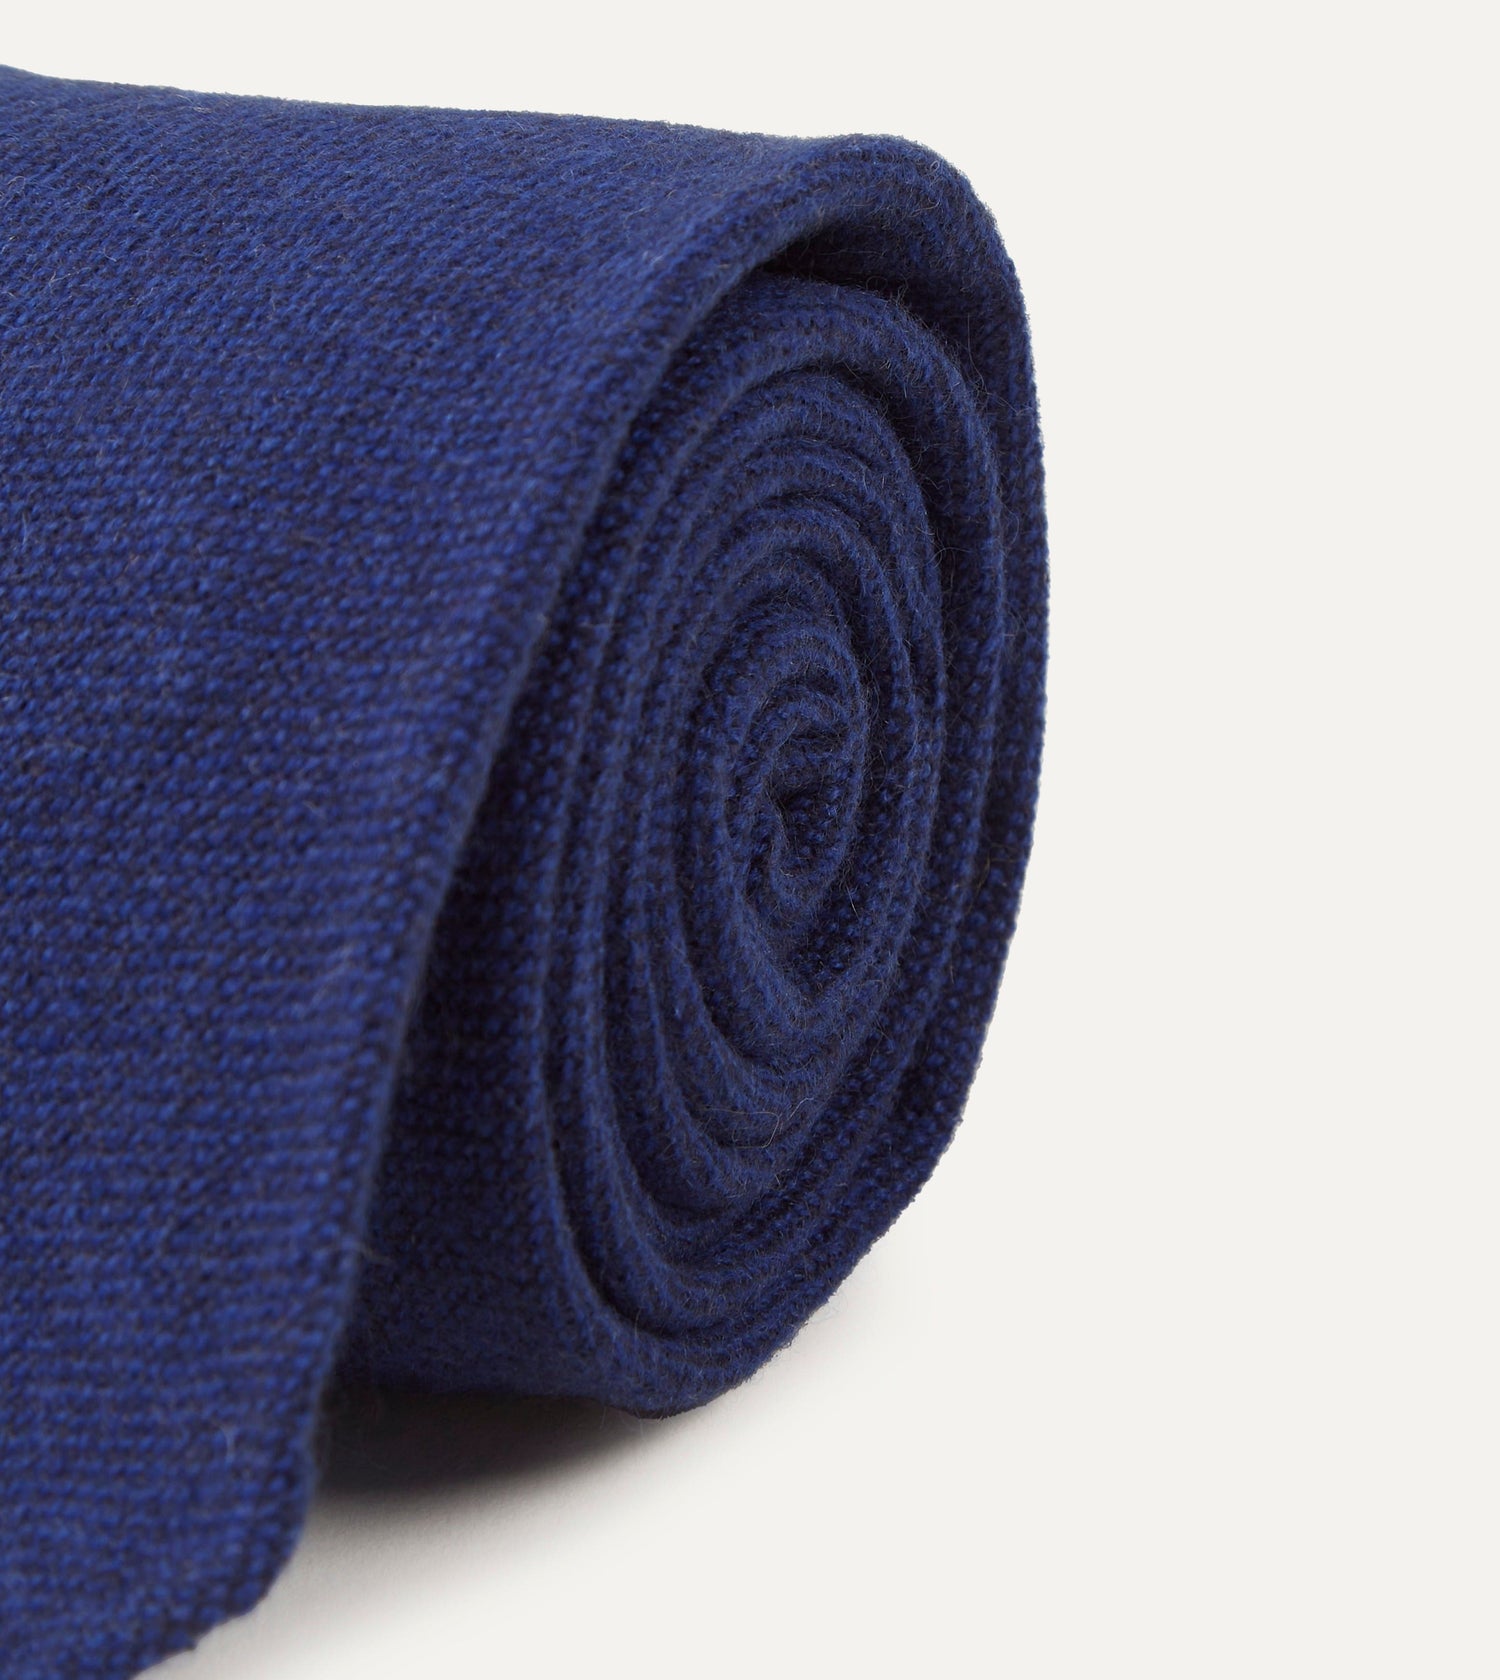 Light Navy Pure Cashmere Solid Hand Rolled Tie